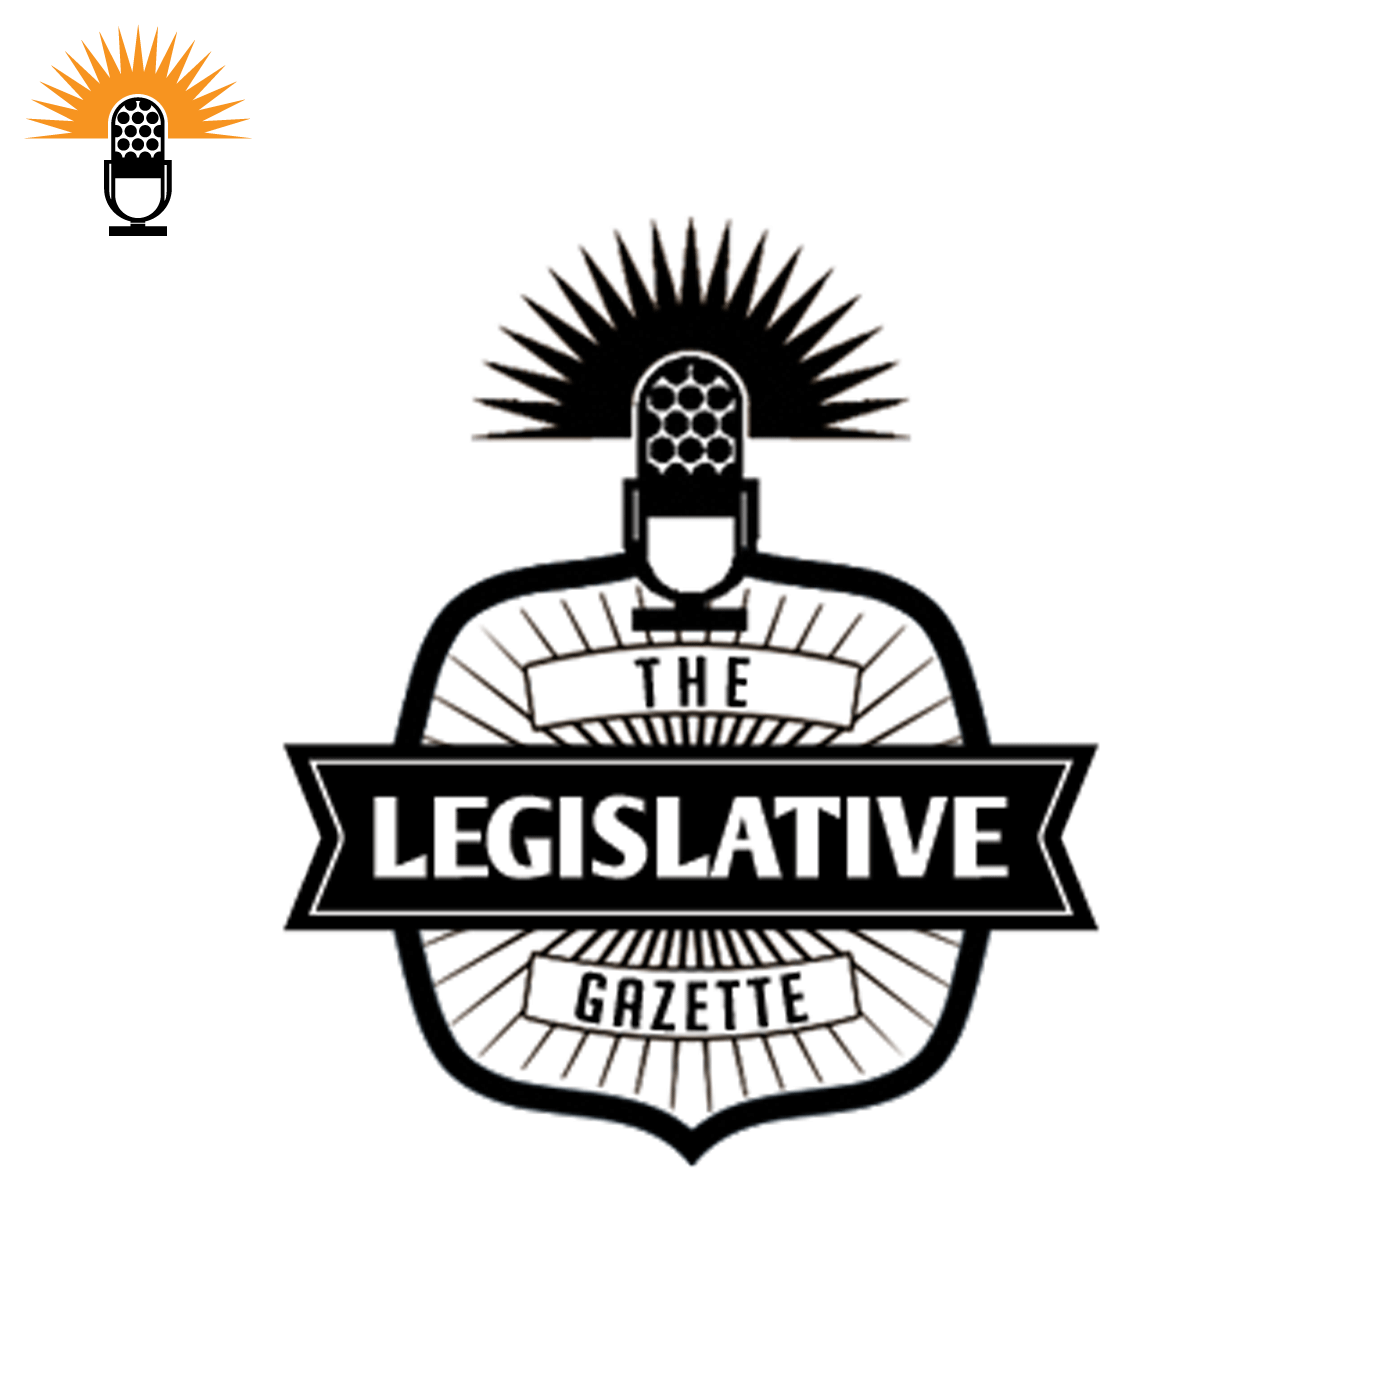 The Legislative Gazette - lawmakers negotiate affordable housing and tenant protections